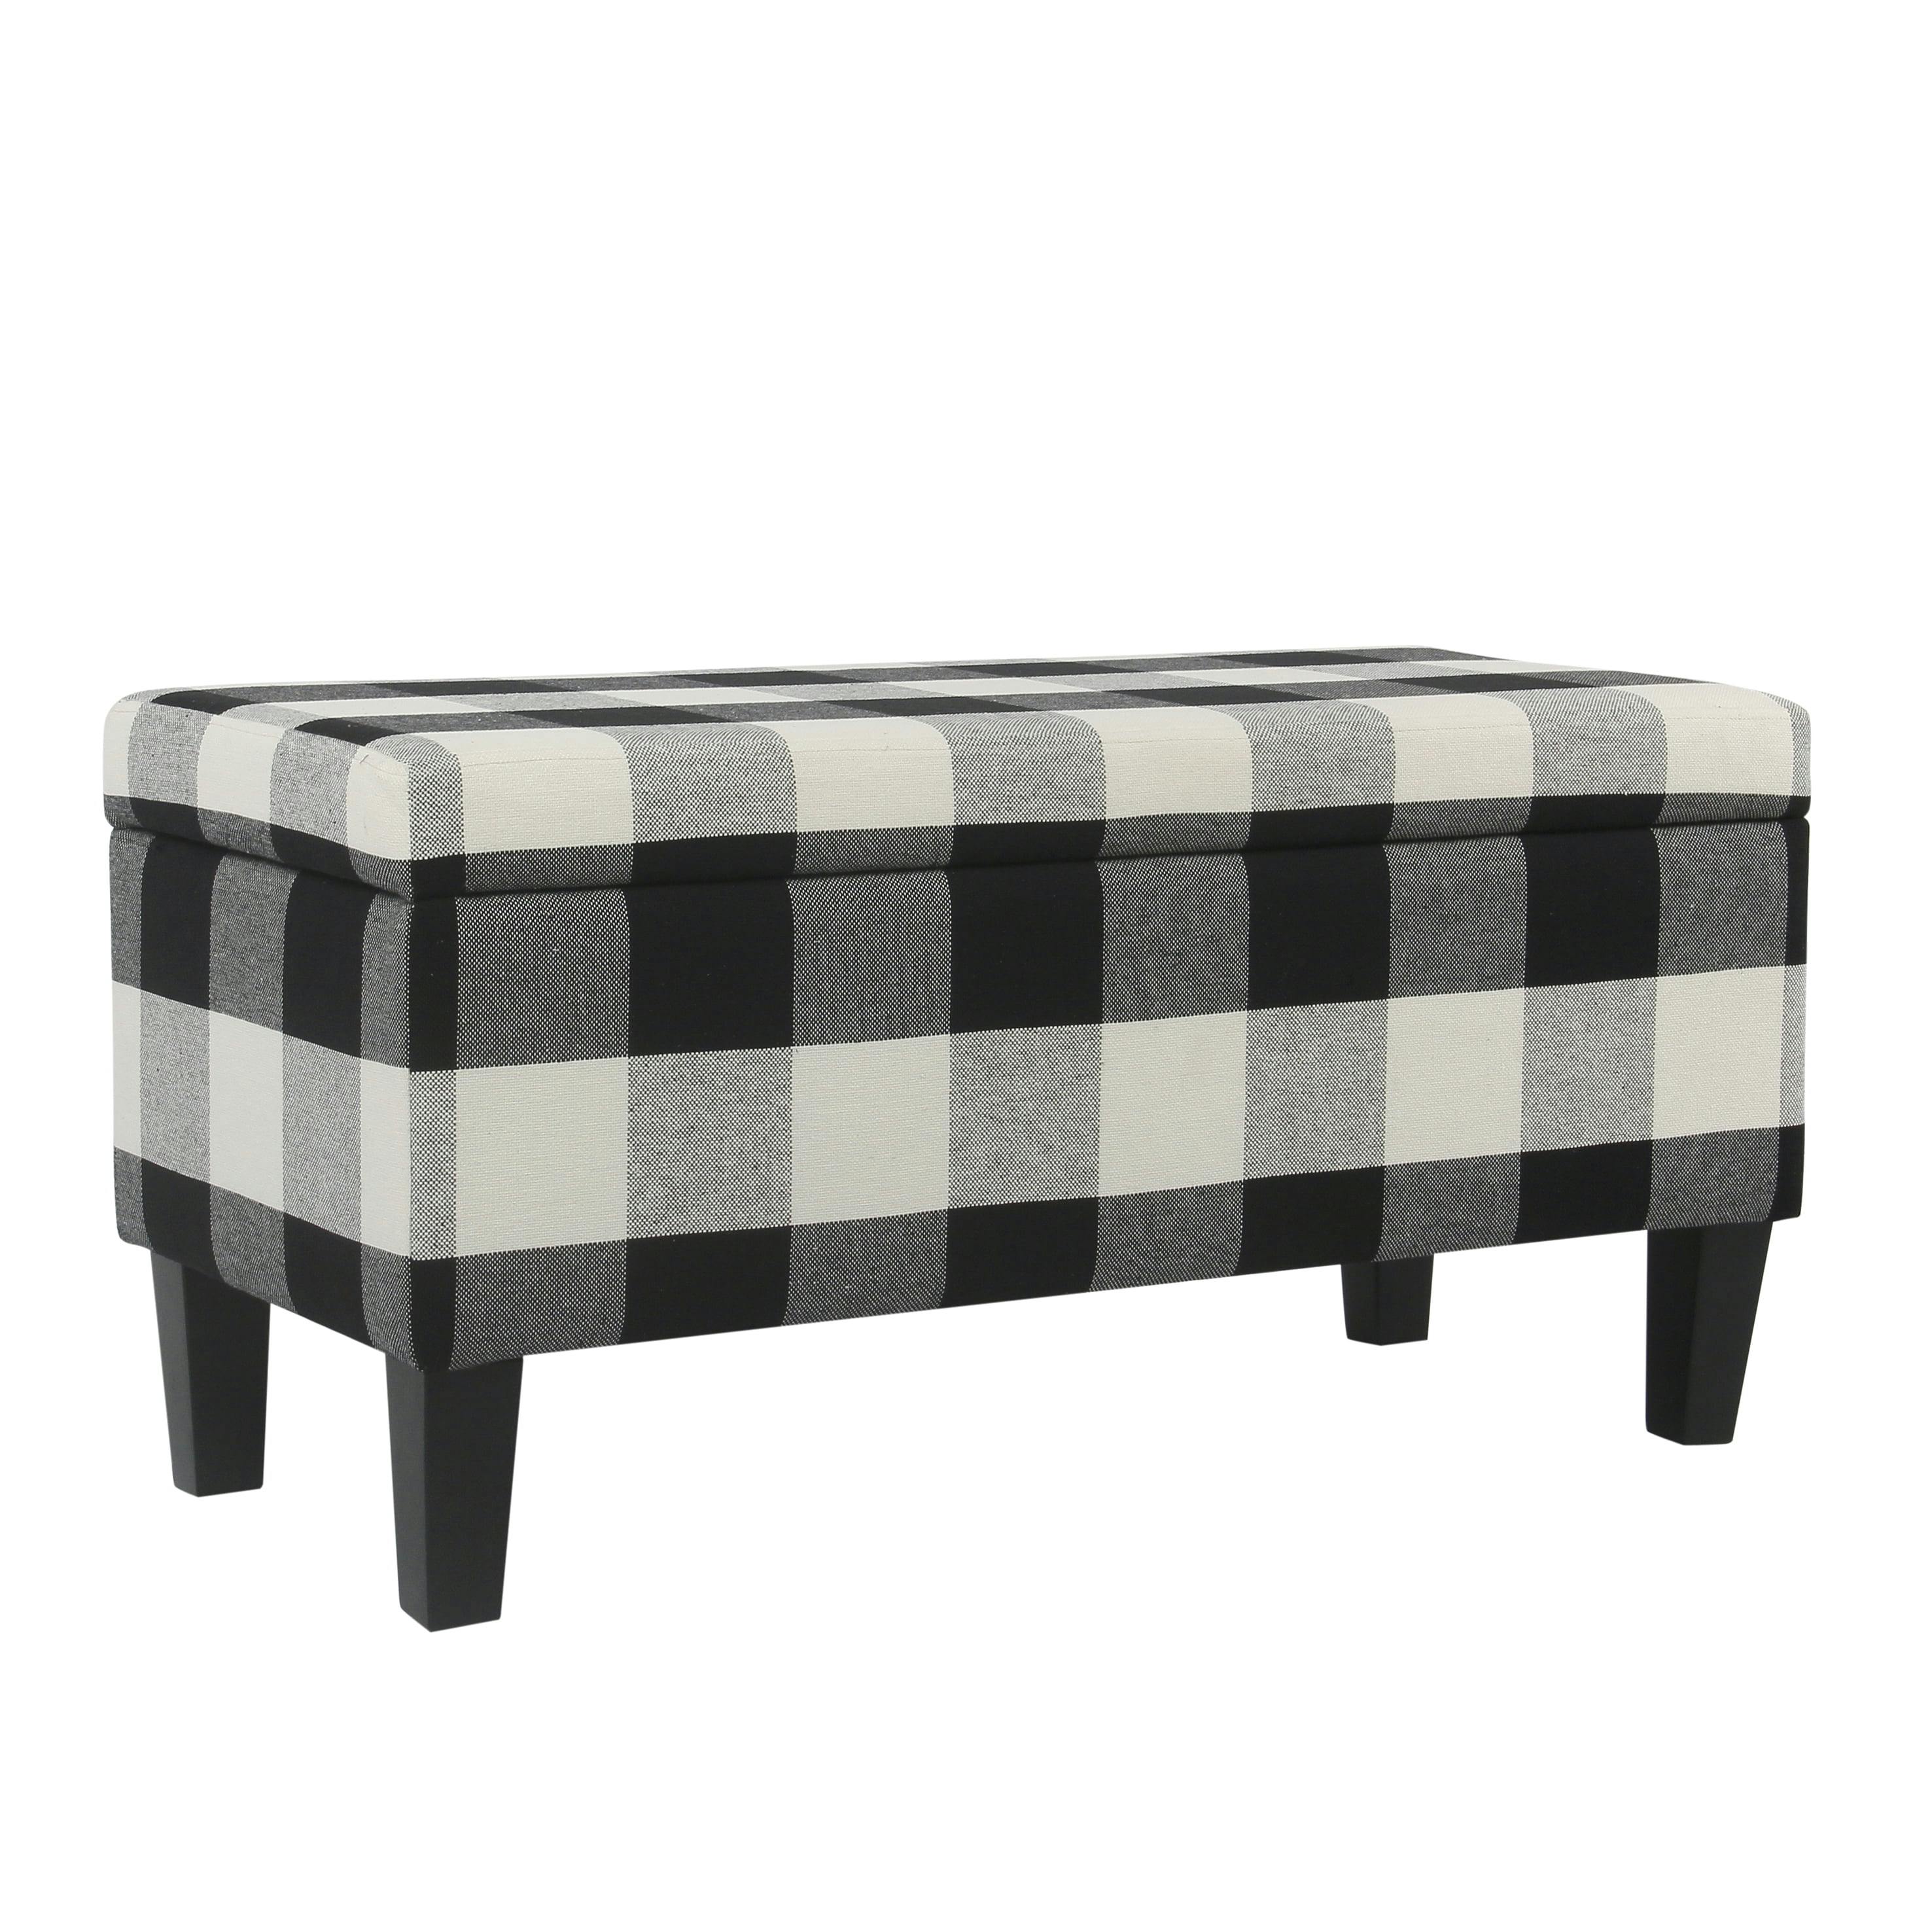 Elegant Black and White Plaid Upholstered Storage Bench with Tapered Legs